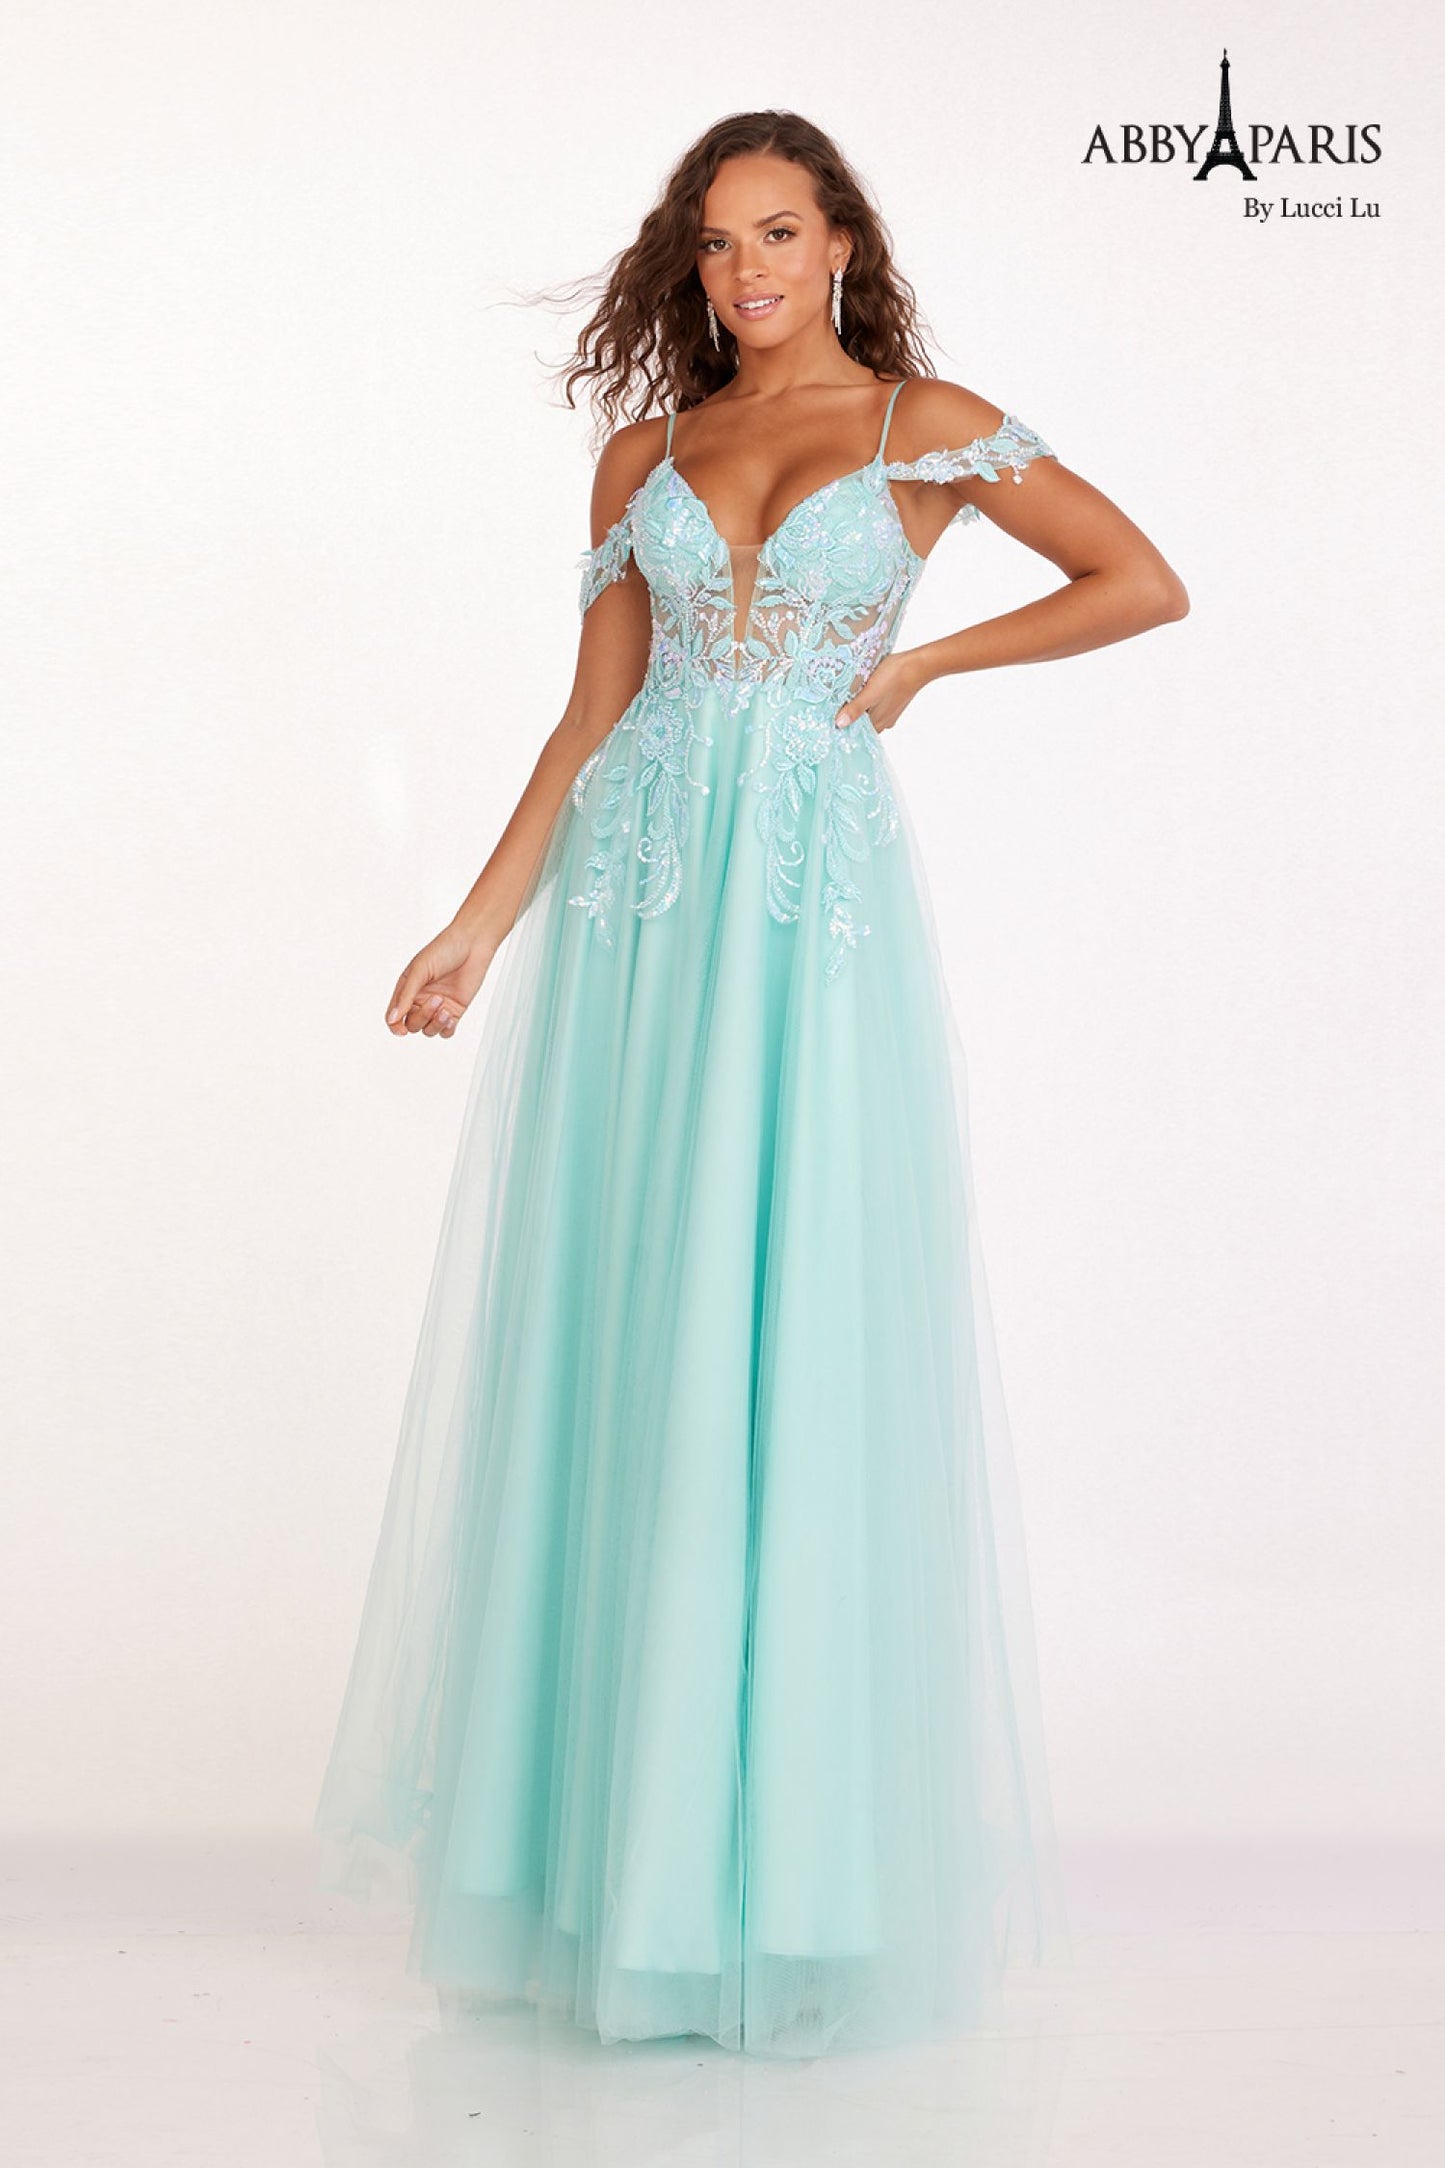 The Abby Paris 90242 Sheer Sequin Corset offers a stunning off-the-shoulder A-line silhouette, perfect for any formal event. The sheer sequin design adds a touch of glamour, while the corset structure provides a flattering fit. Make a statement and turn heads with this elegant and sophisticated prom dress.  Sizes: 0-14  Colors: Aqua